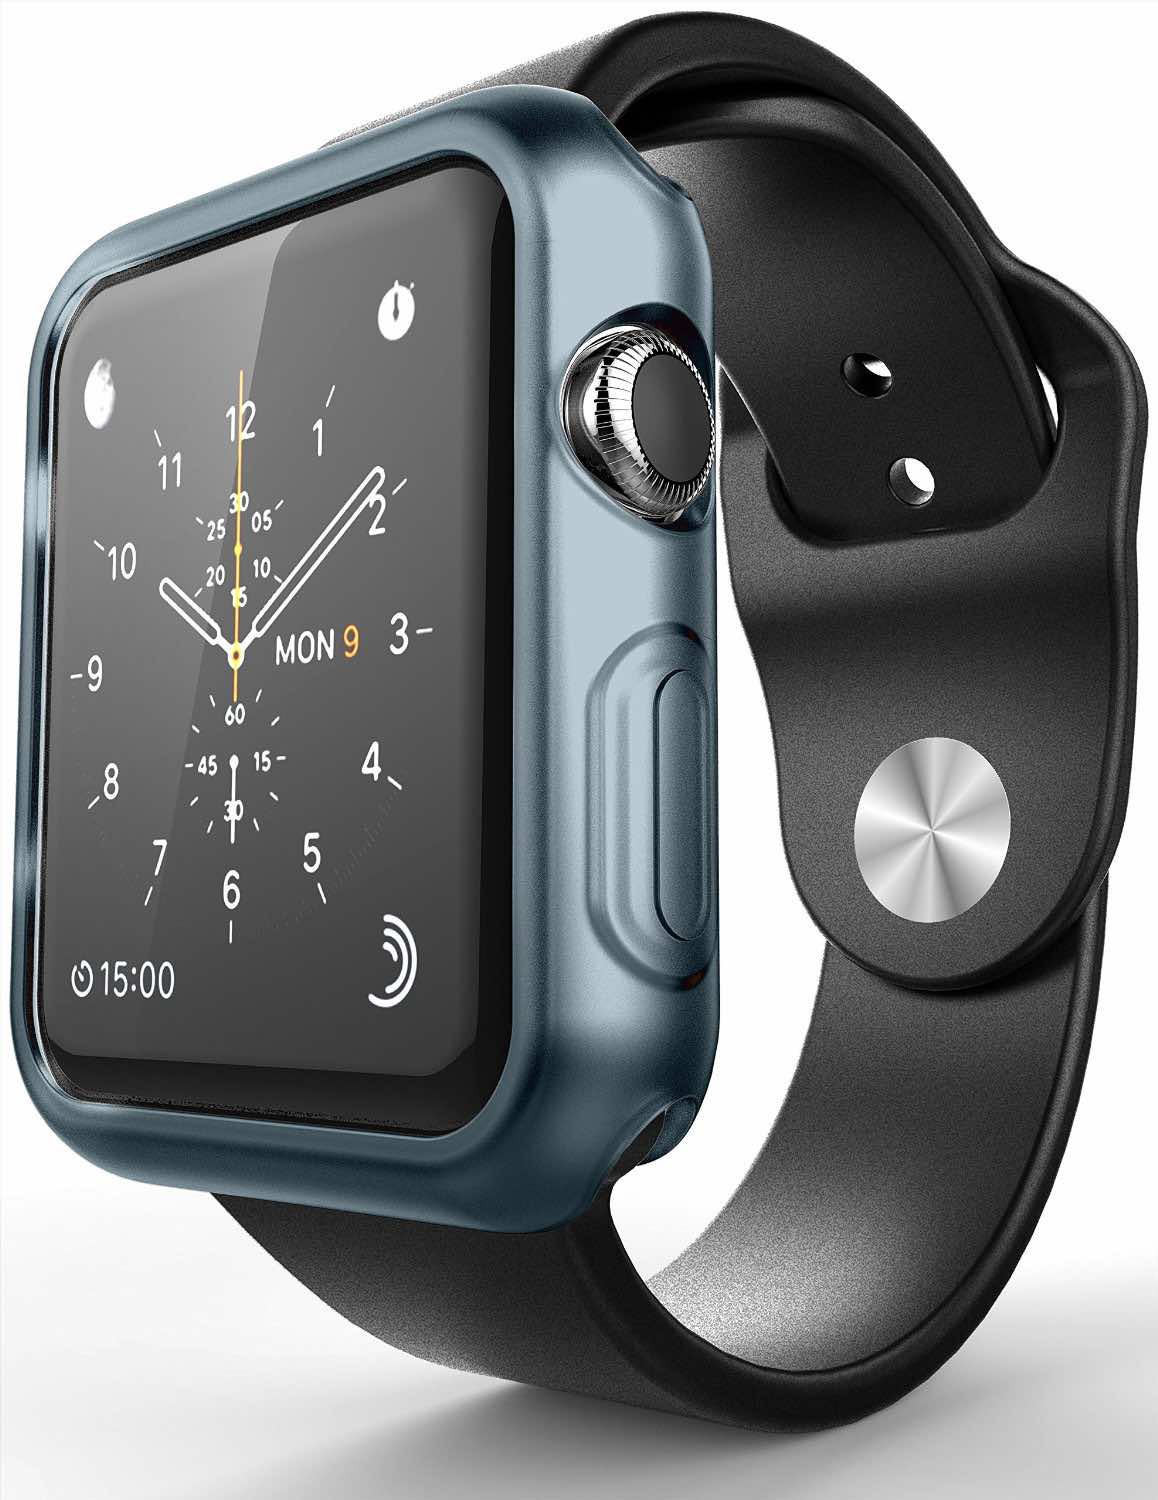 10 Best Cases For Apple Watch